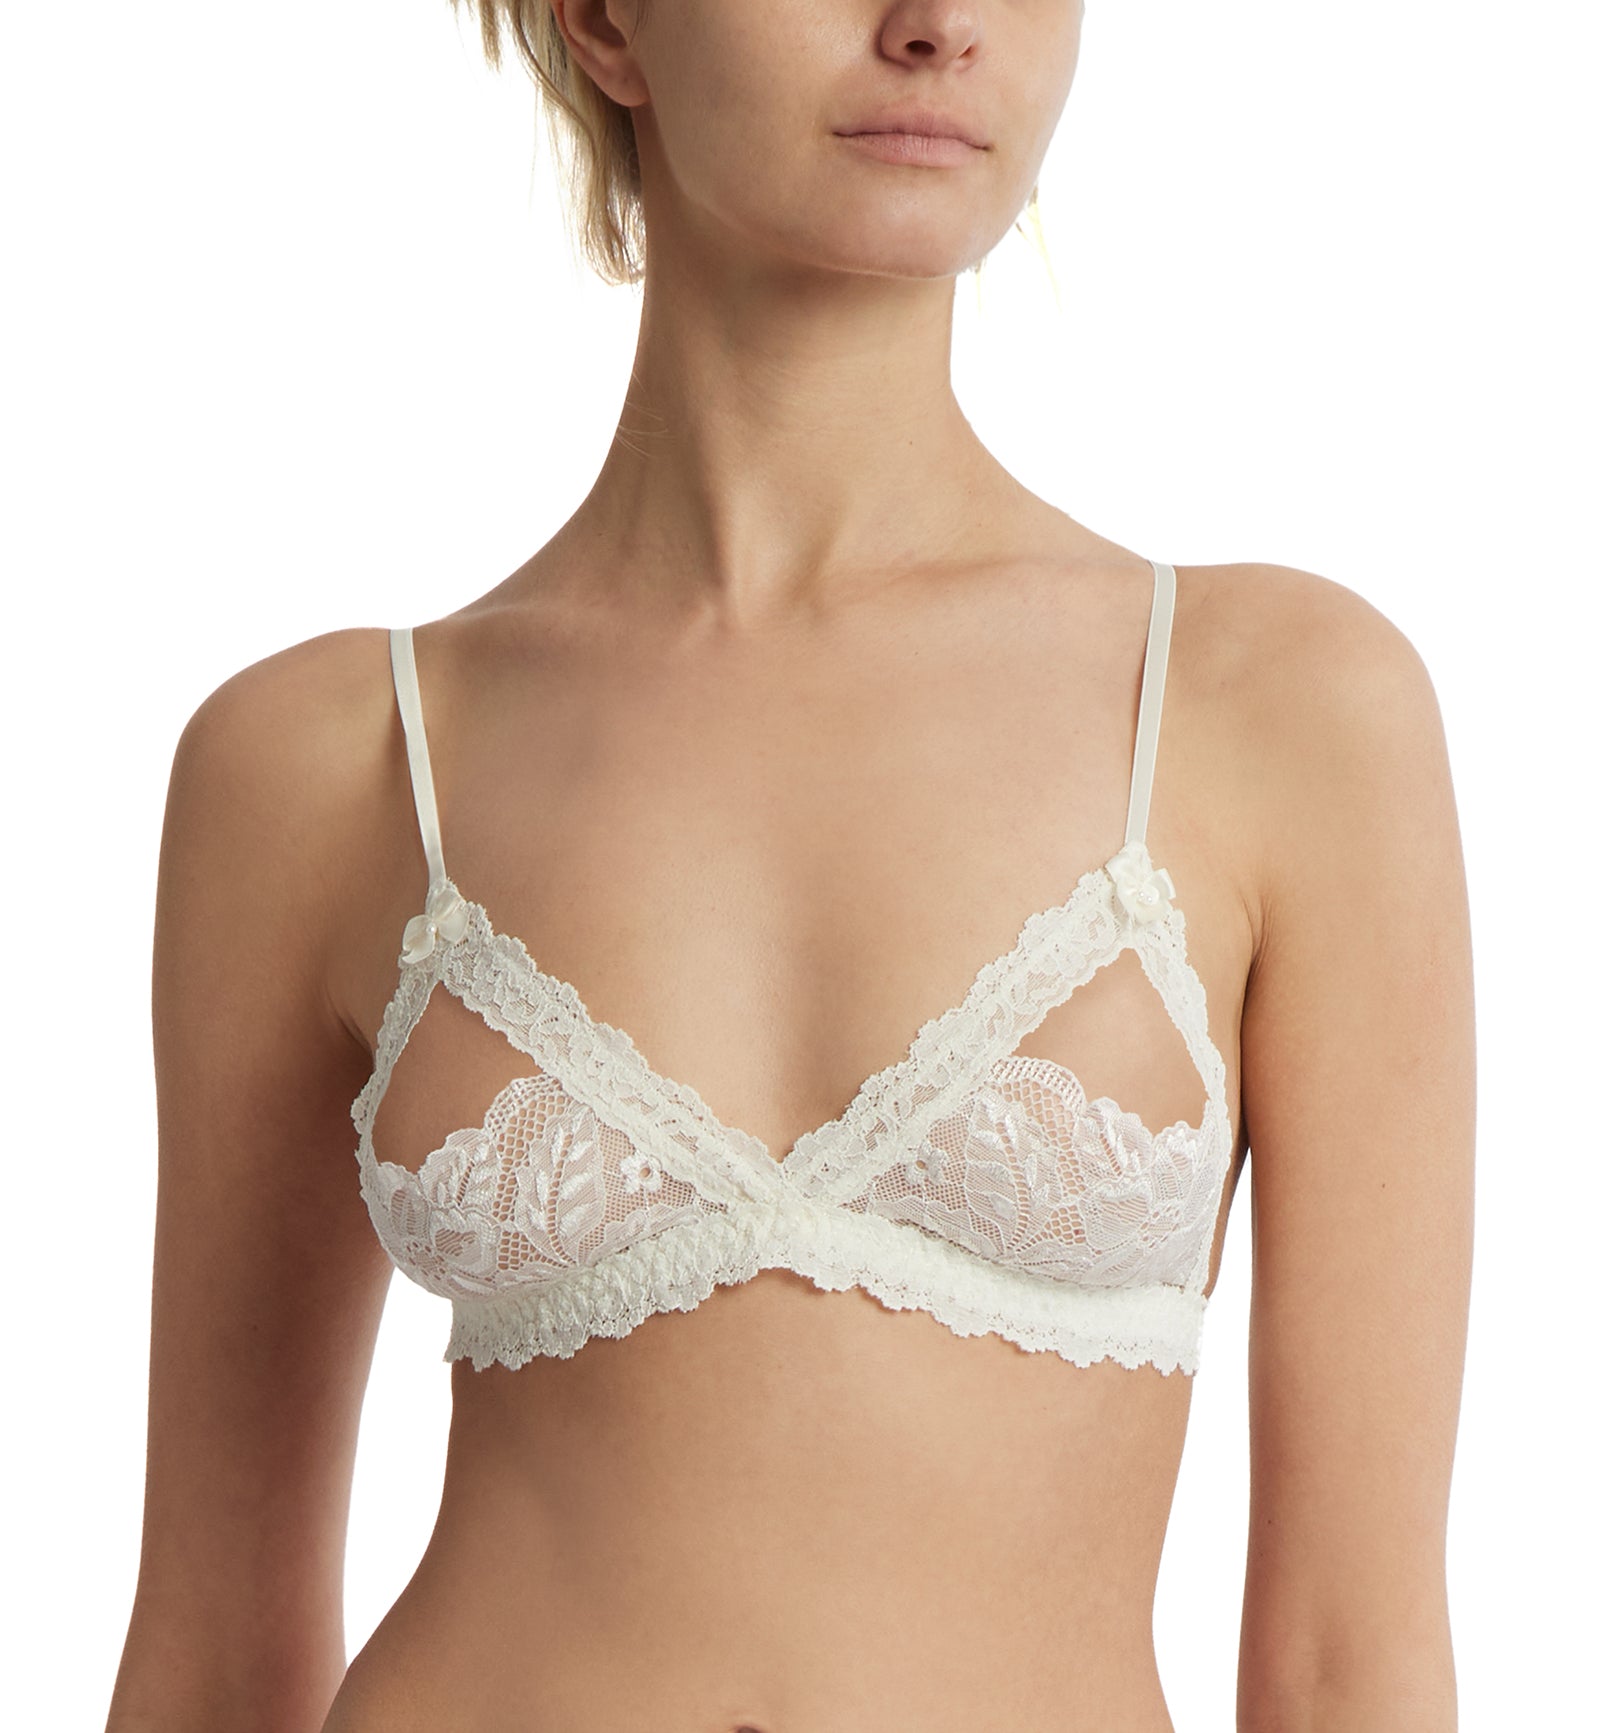 Hanky Panky Honeymoon Crotchless Thong and Bralette Set (946692SBX),Small,Light Ivory - Light Ivory,Small